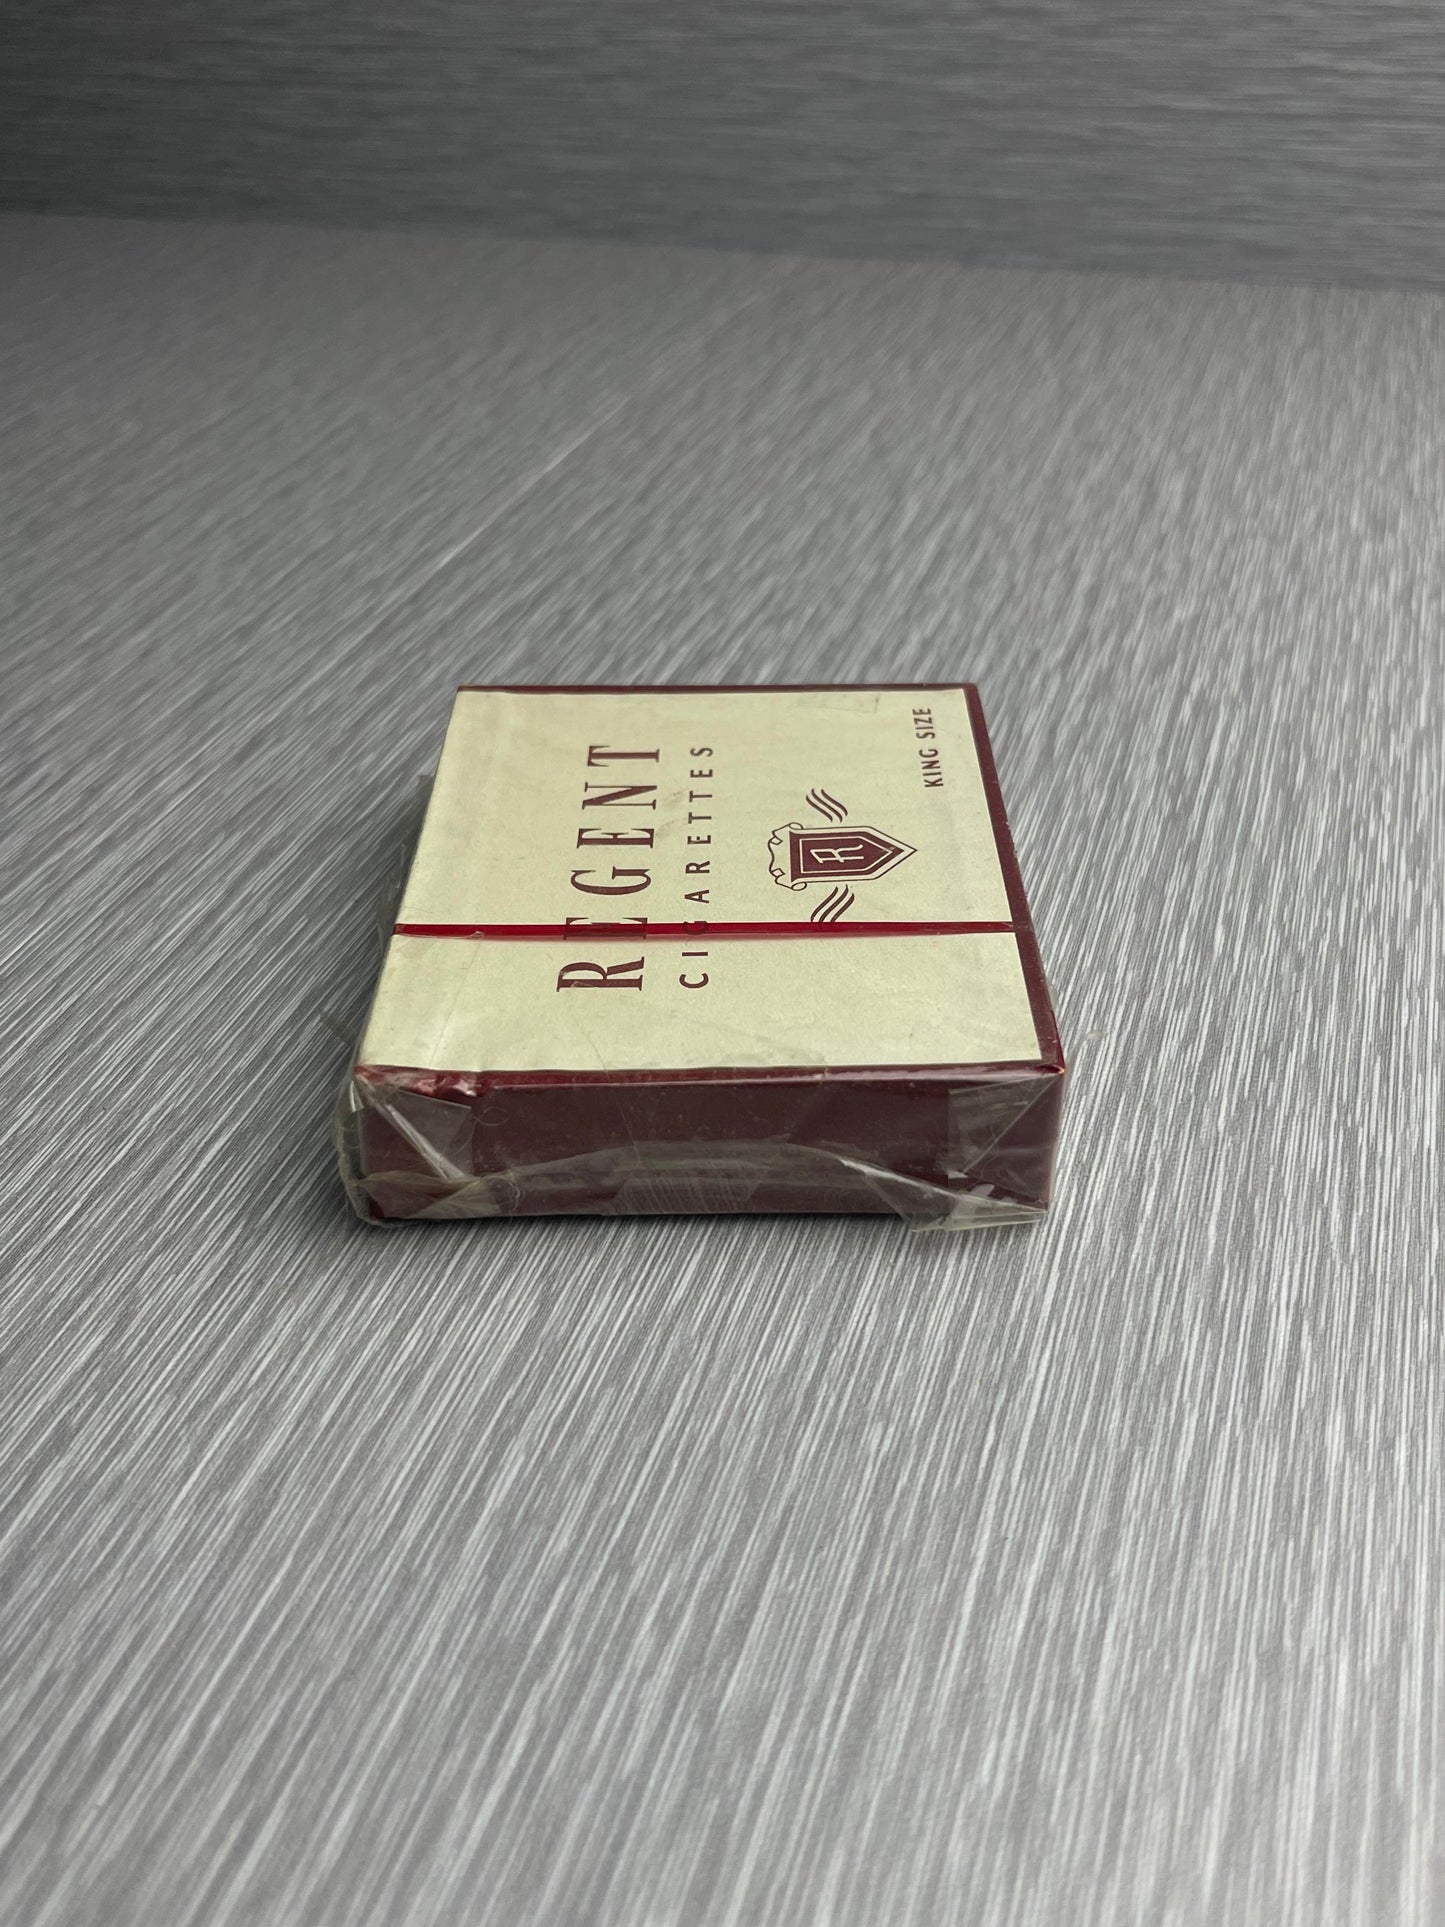 REGENT MID 20TH CENTURY UNOPENED & SEALED PACK OF 20 KING SIZE CIGARETTES 125 SERIES 1955